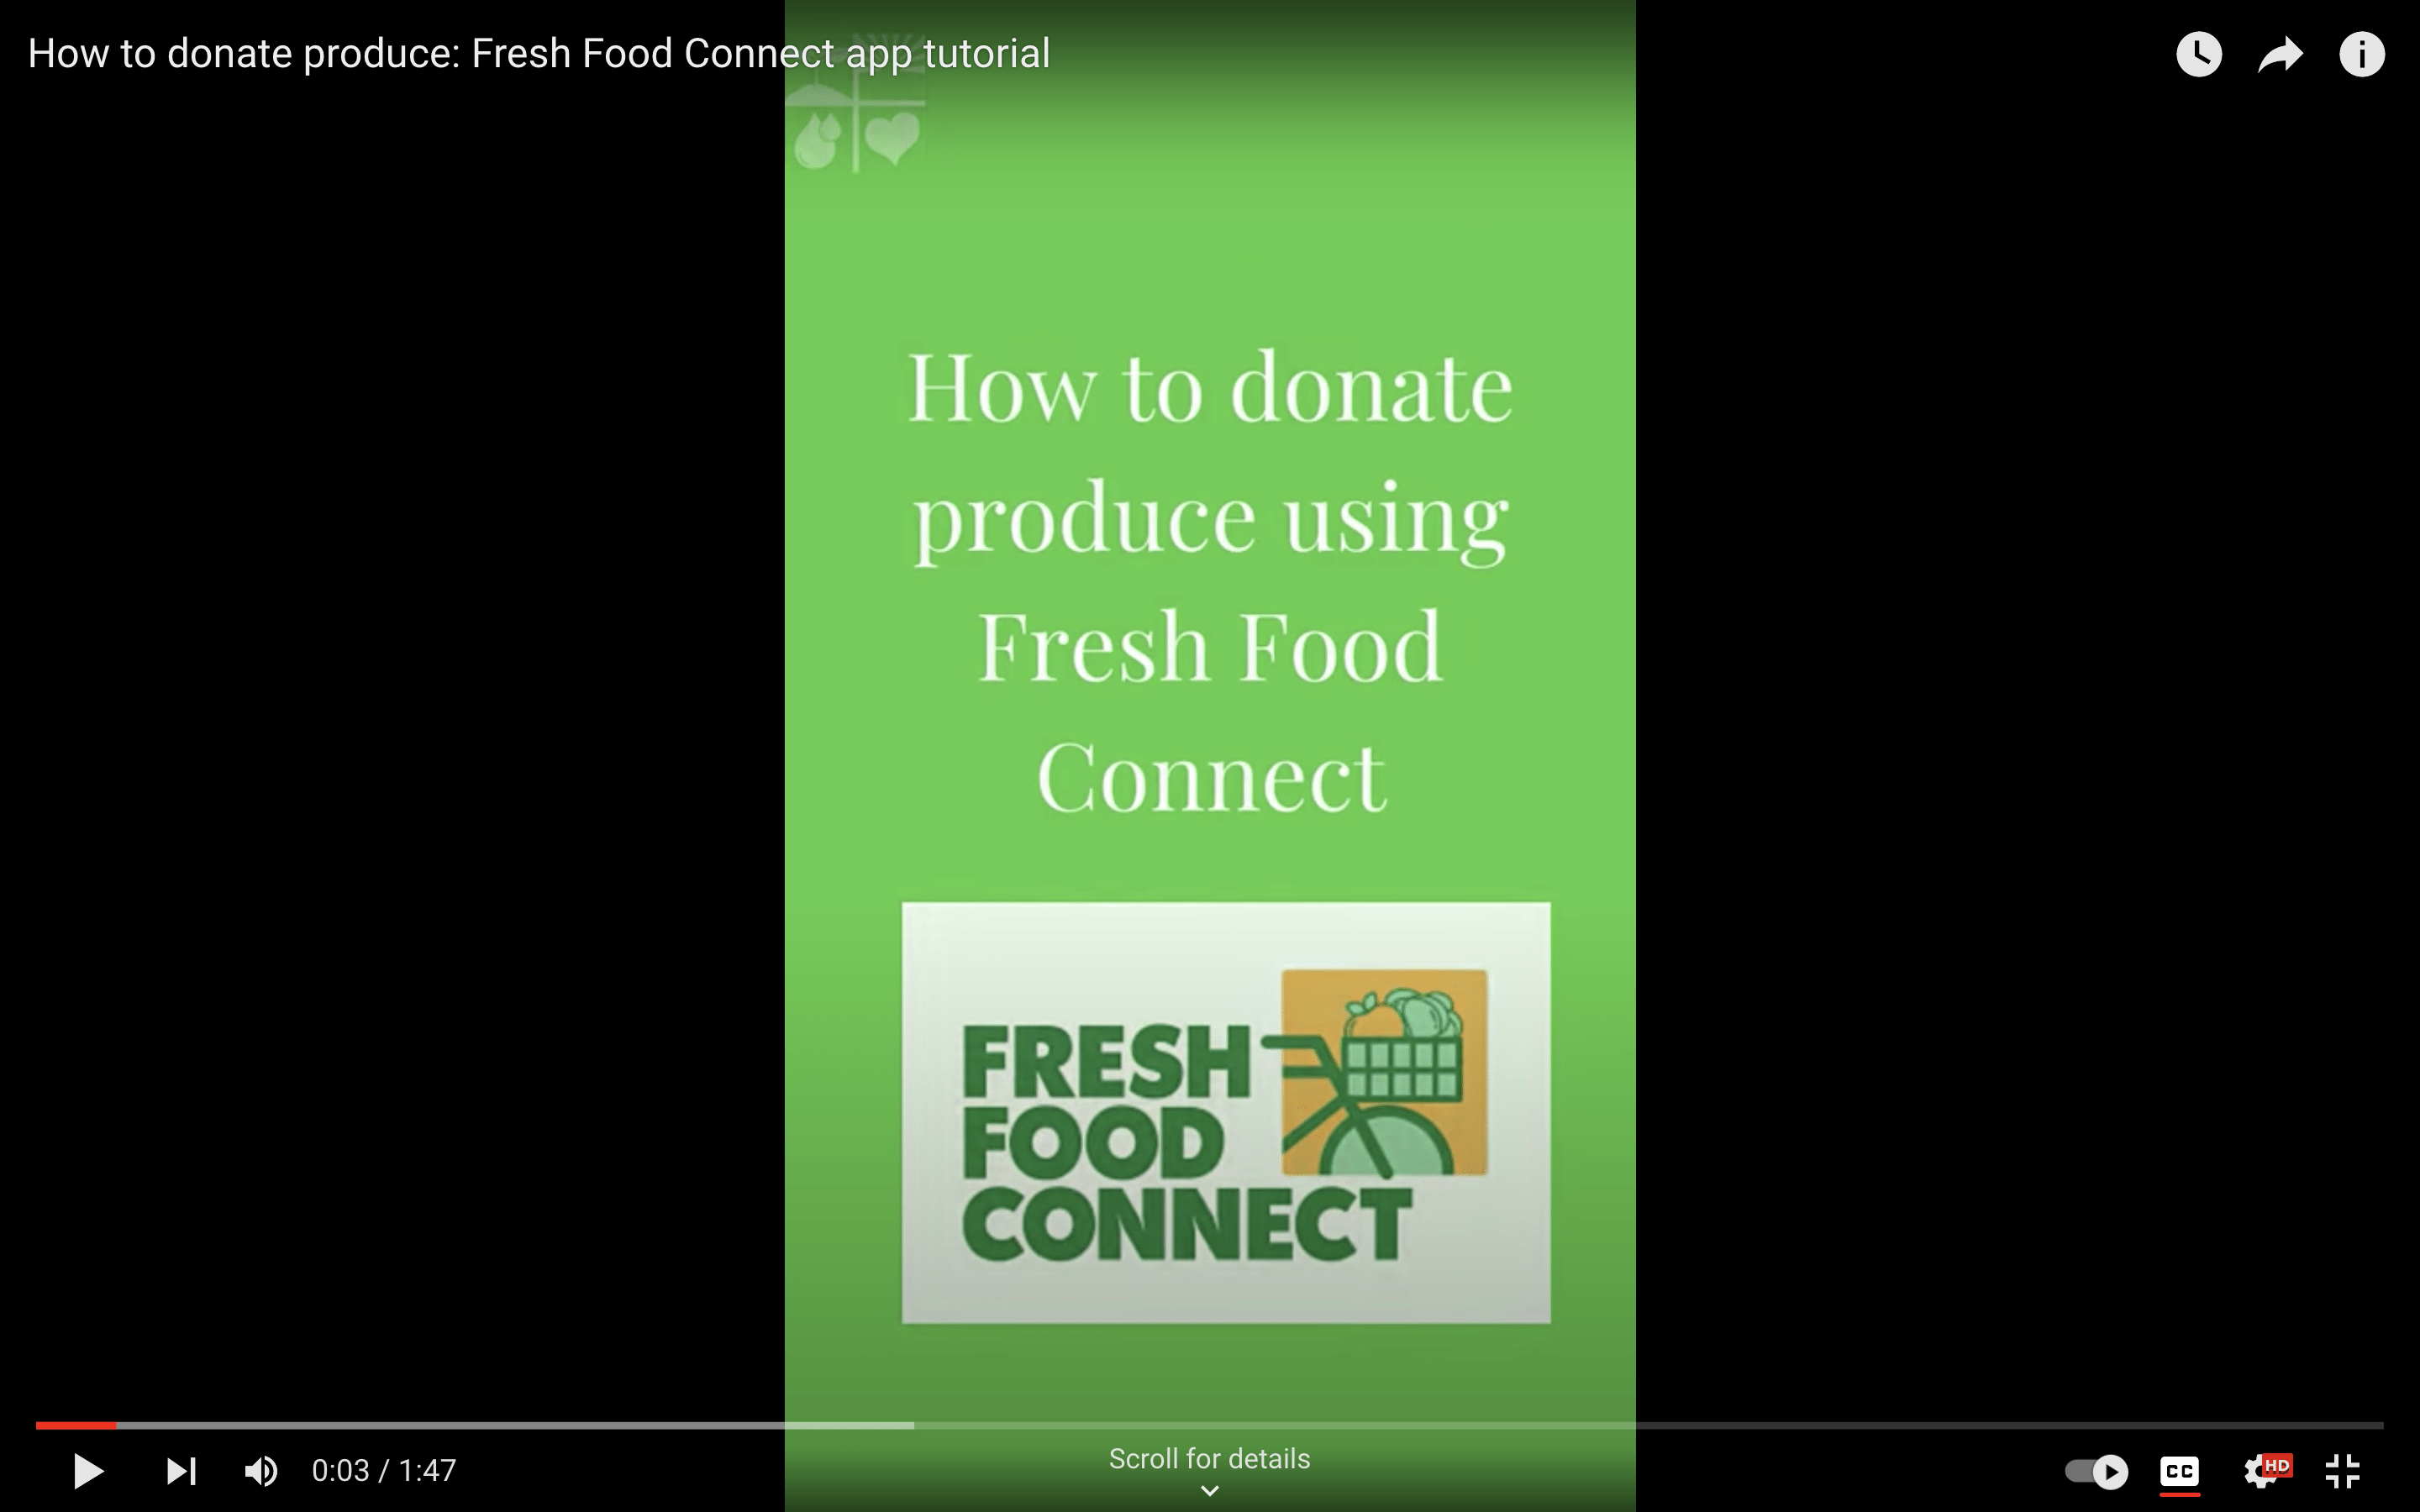 How to donate produce: Fresh Food Connect app tutorial